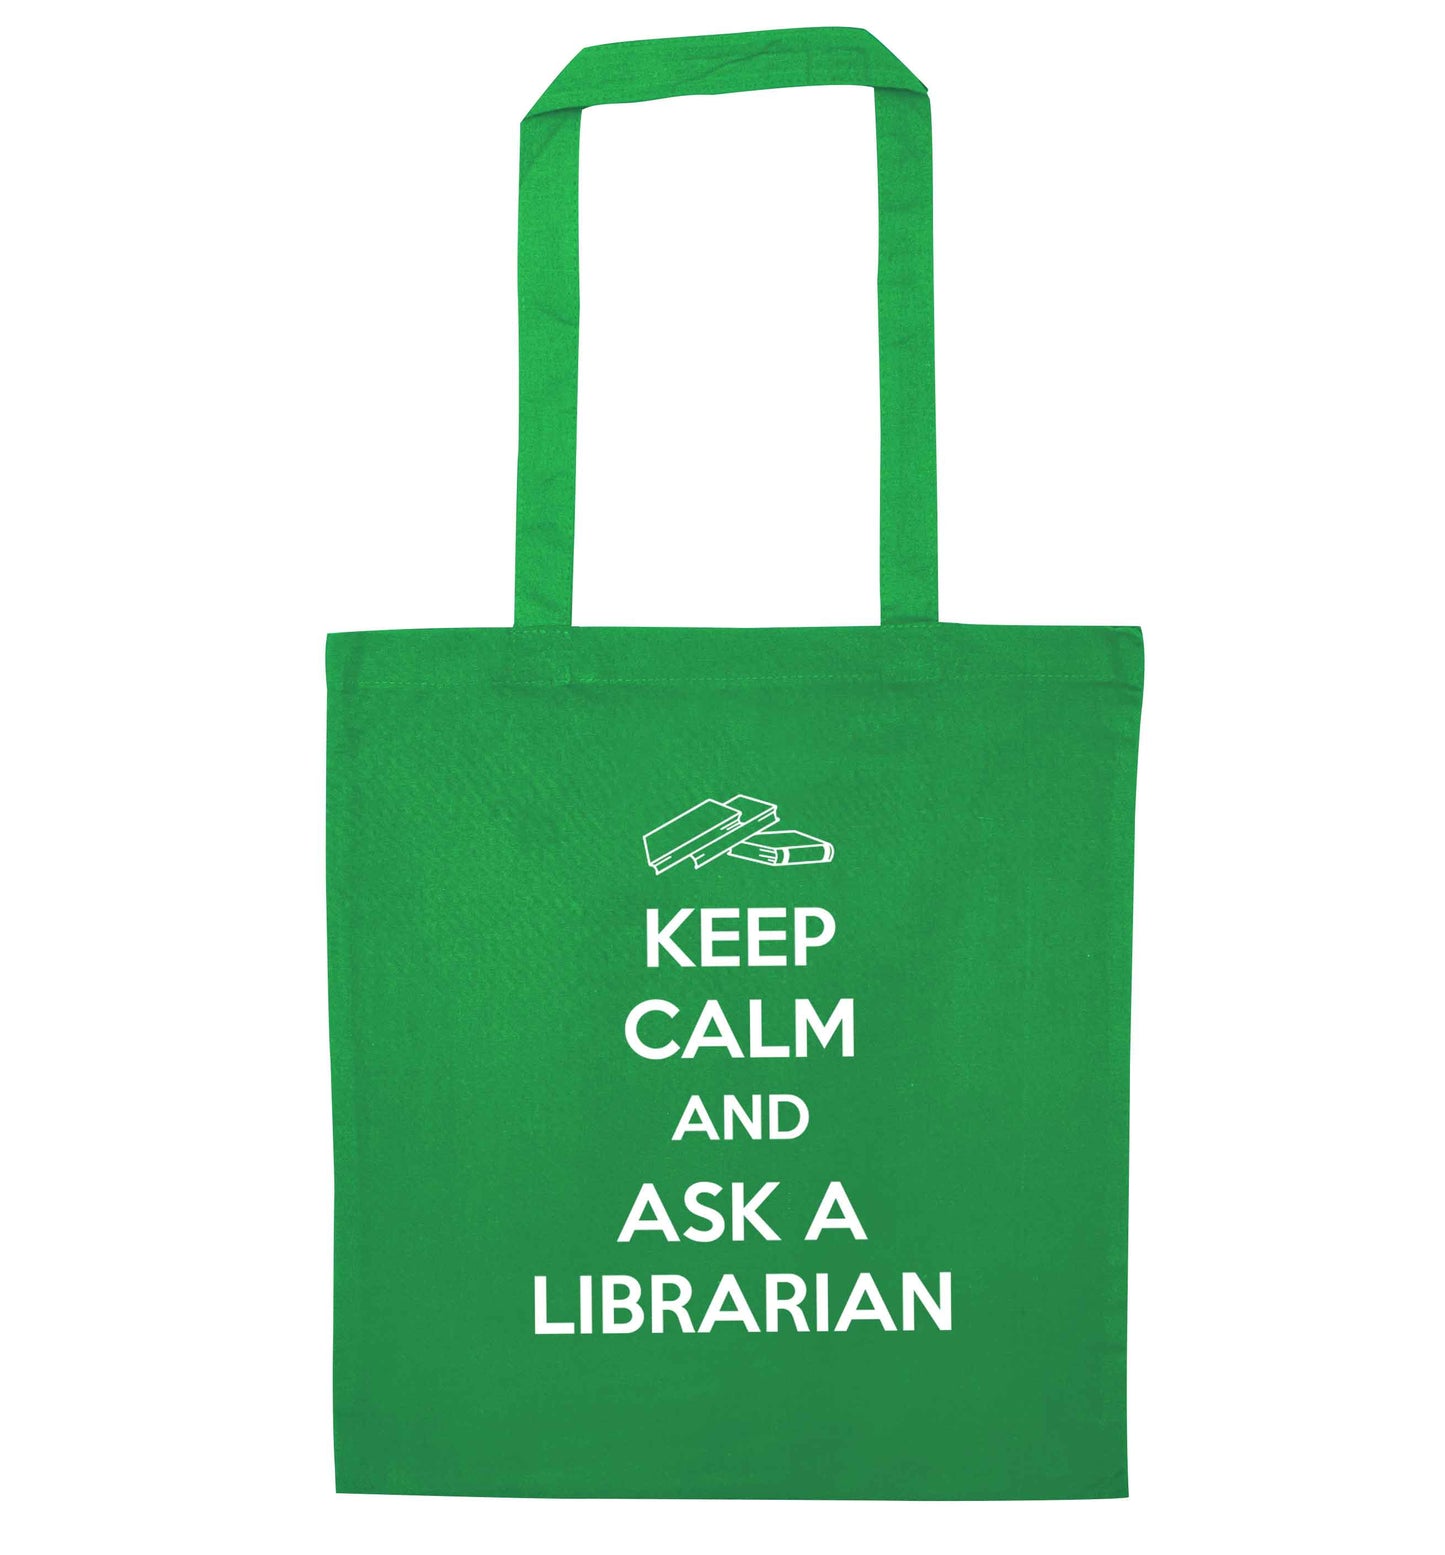 Keep calm and ask a librarian green tote bag